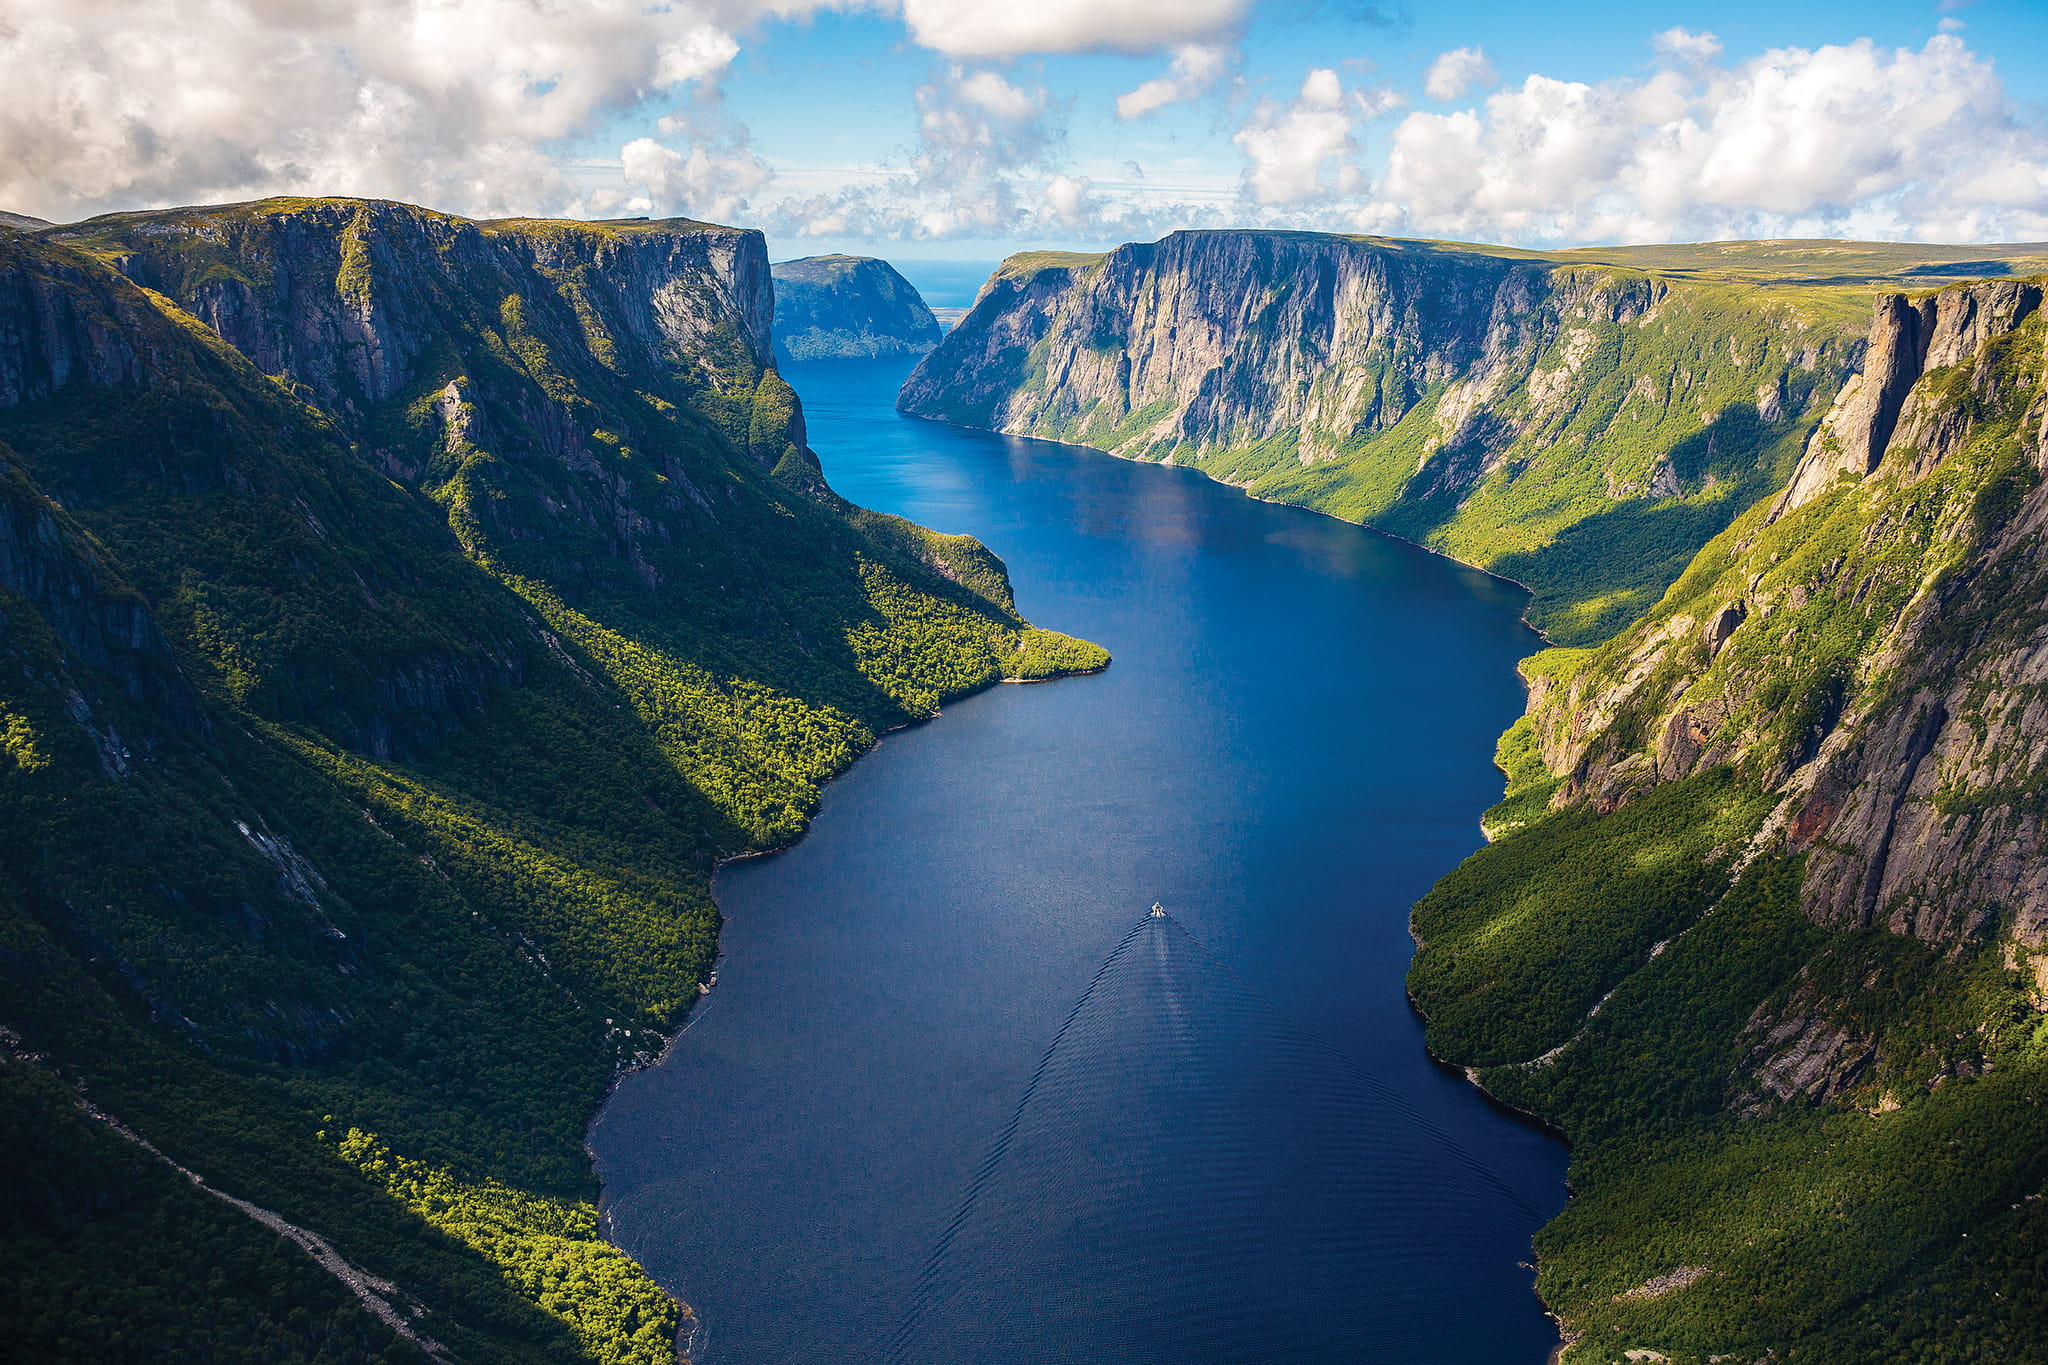 If you are far away from Waterton Lakes National Park or Wood Buffalo National Park, Gros Morne won't let you down